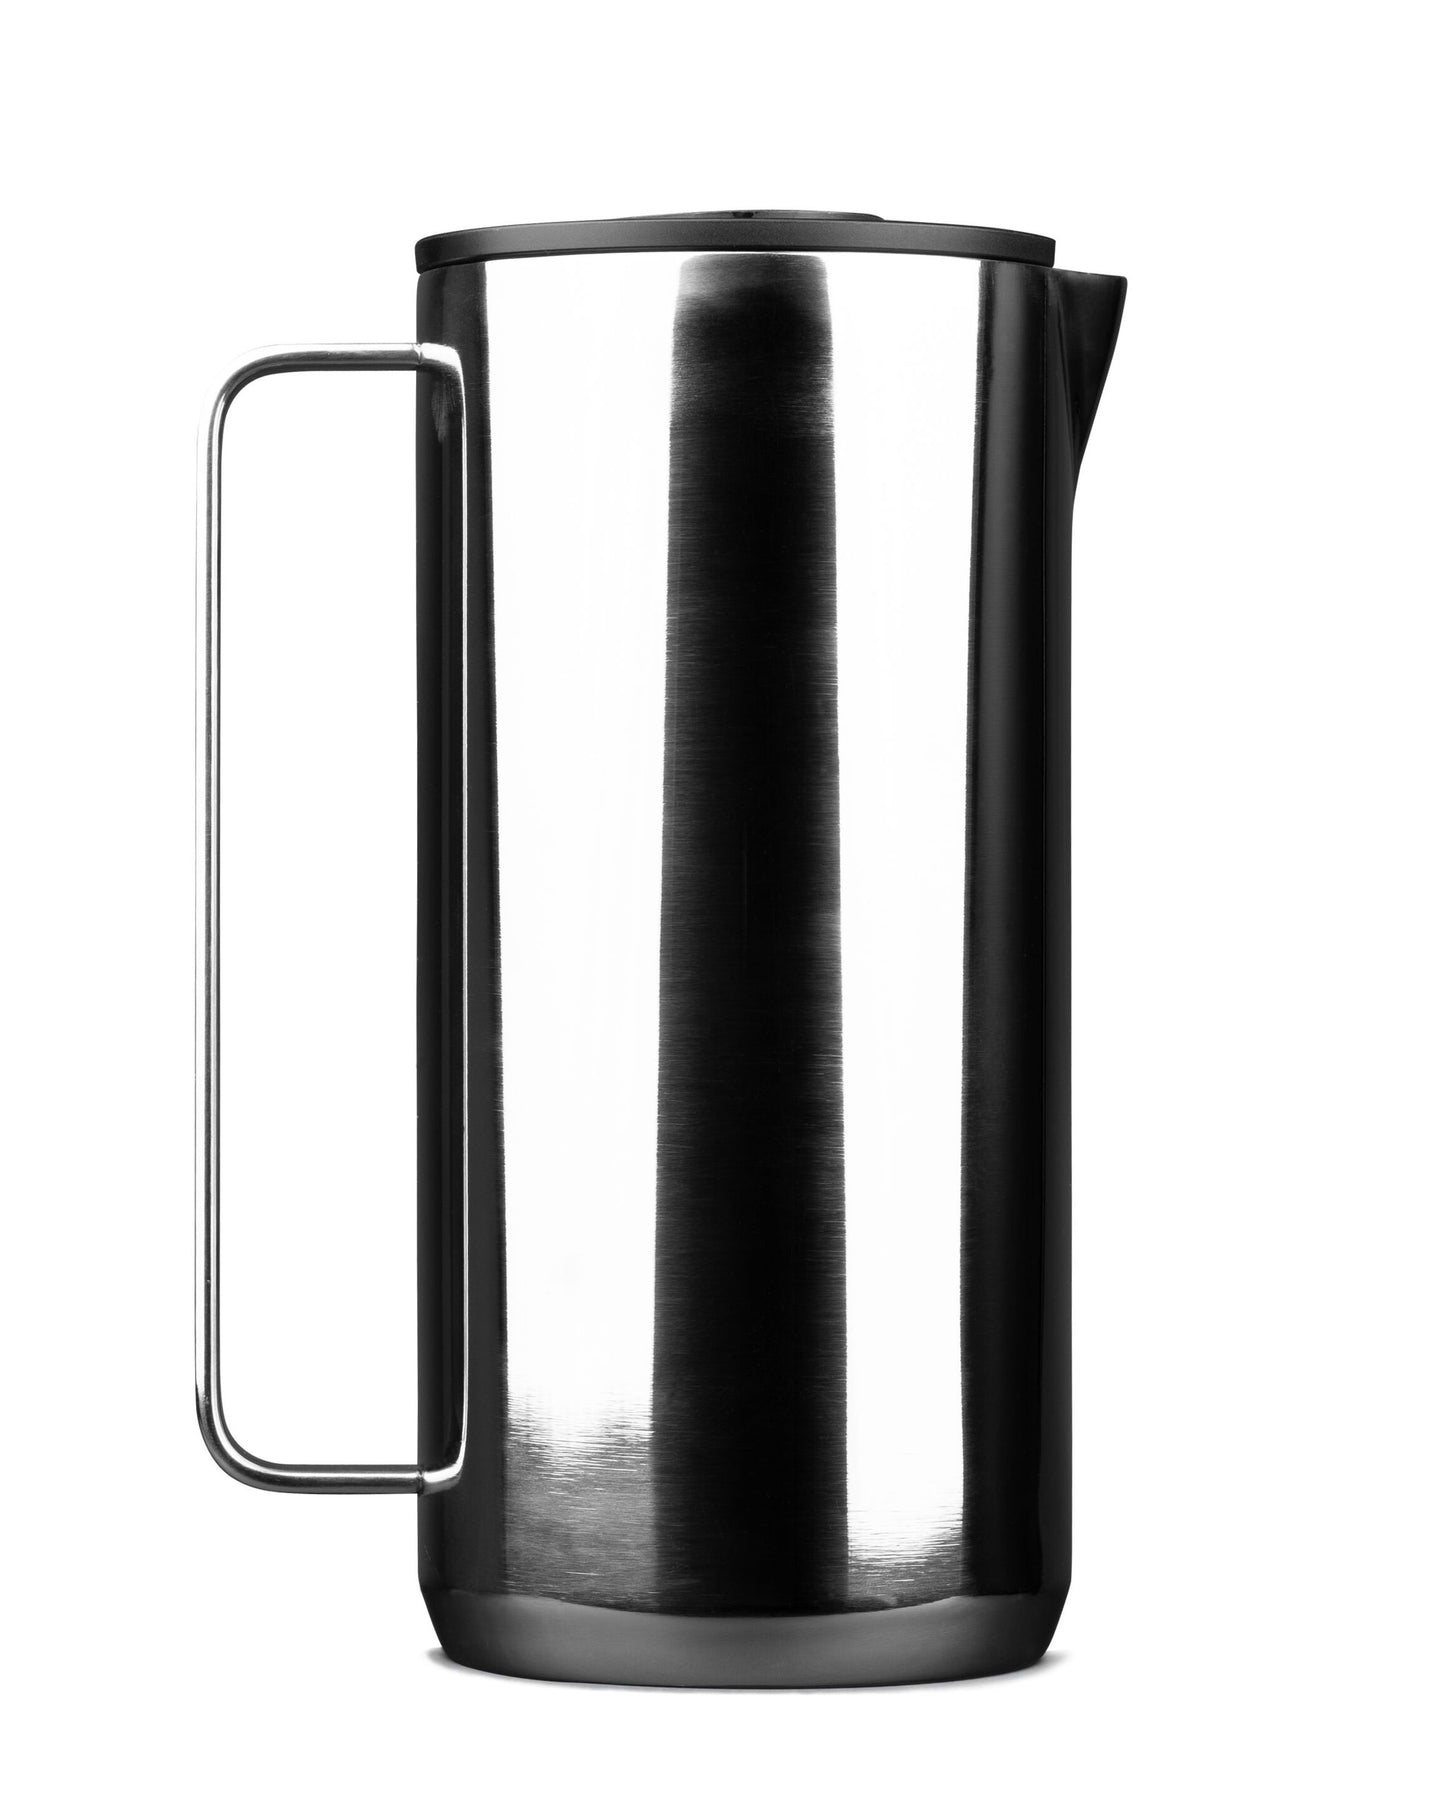 New Standard French Press - Warranty Replacement